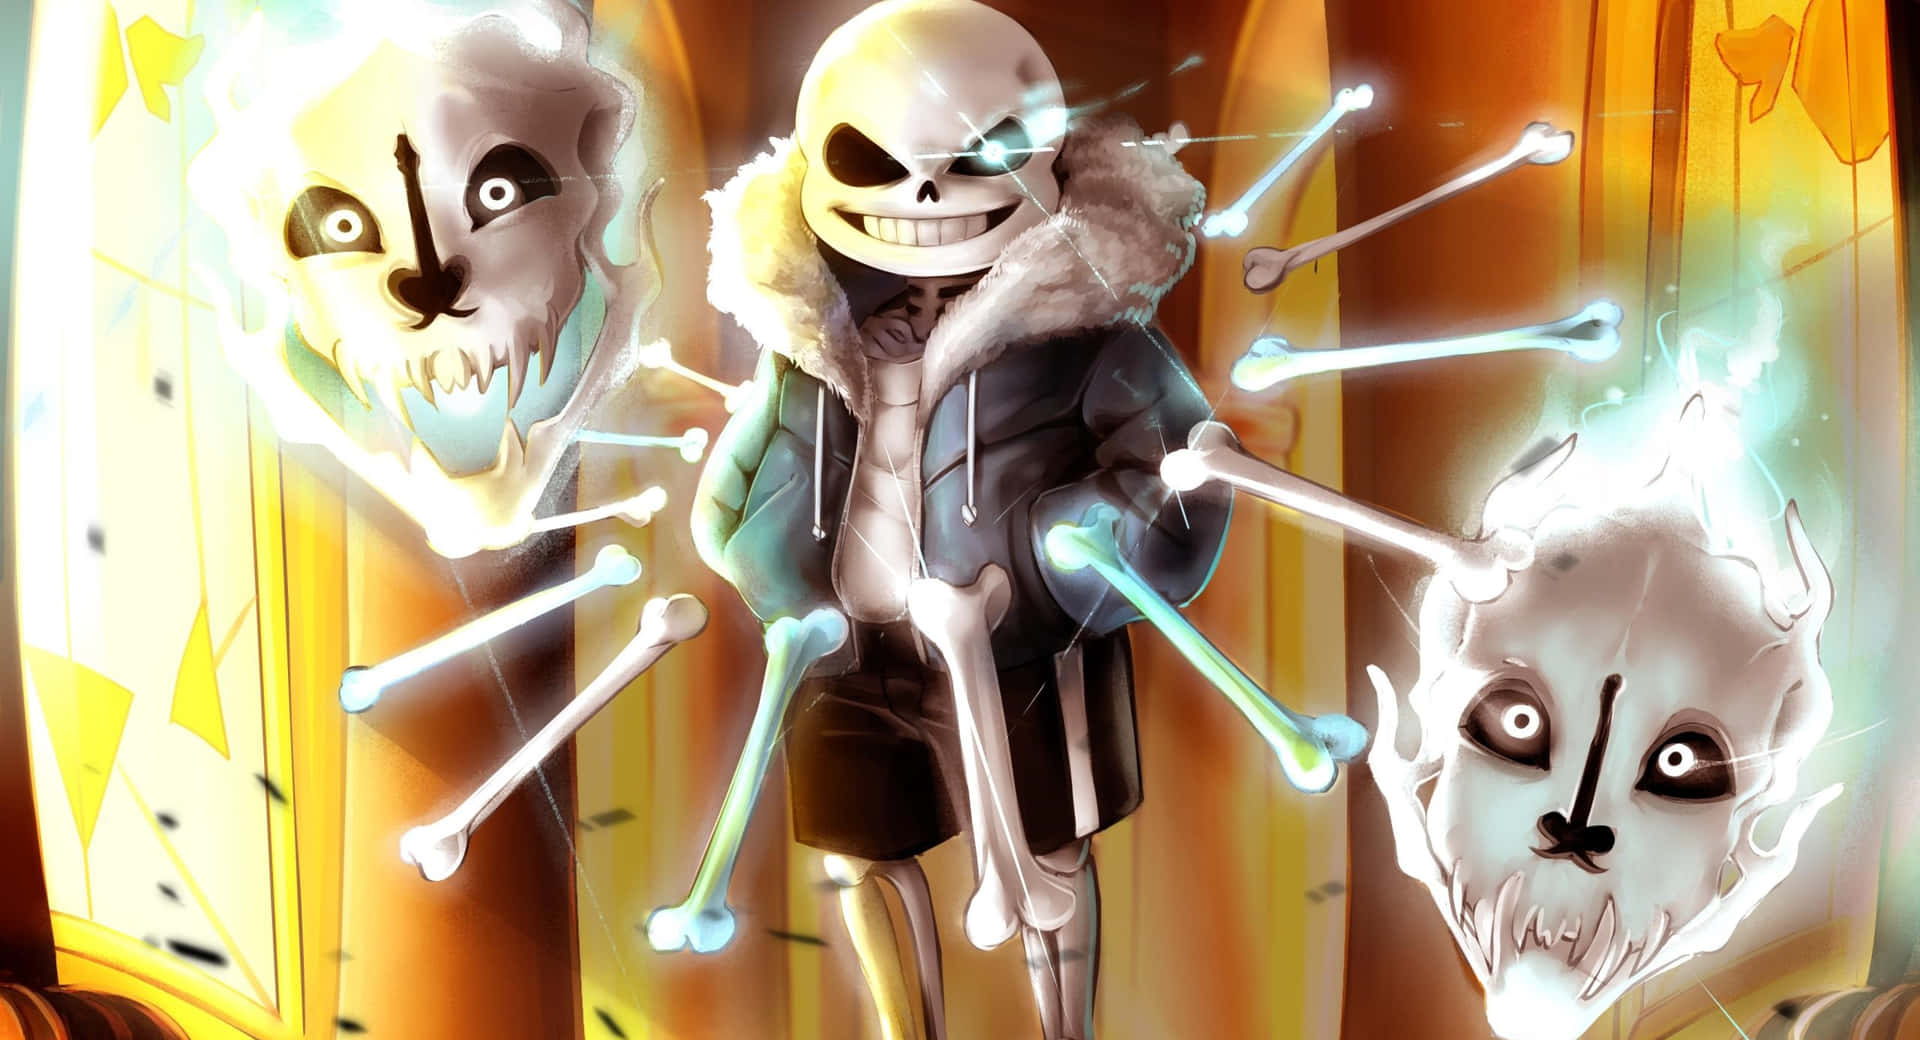 Caption: Enigmatic Sans From Undertale In Glowing Virtual World